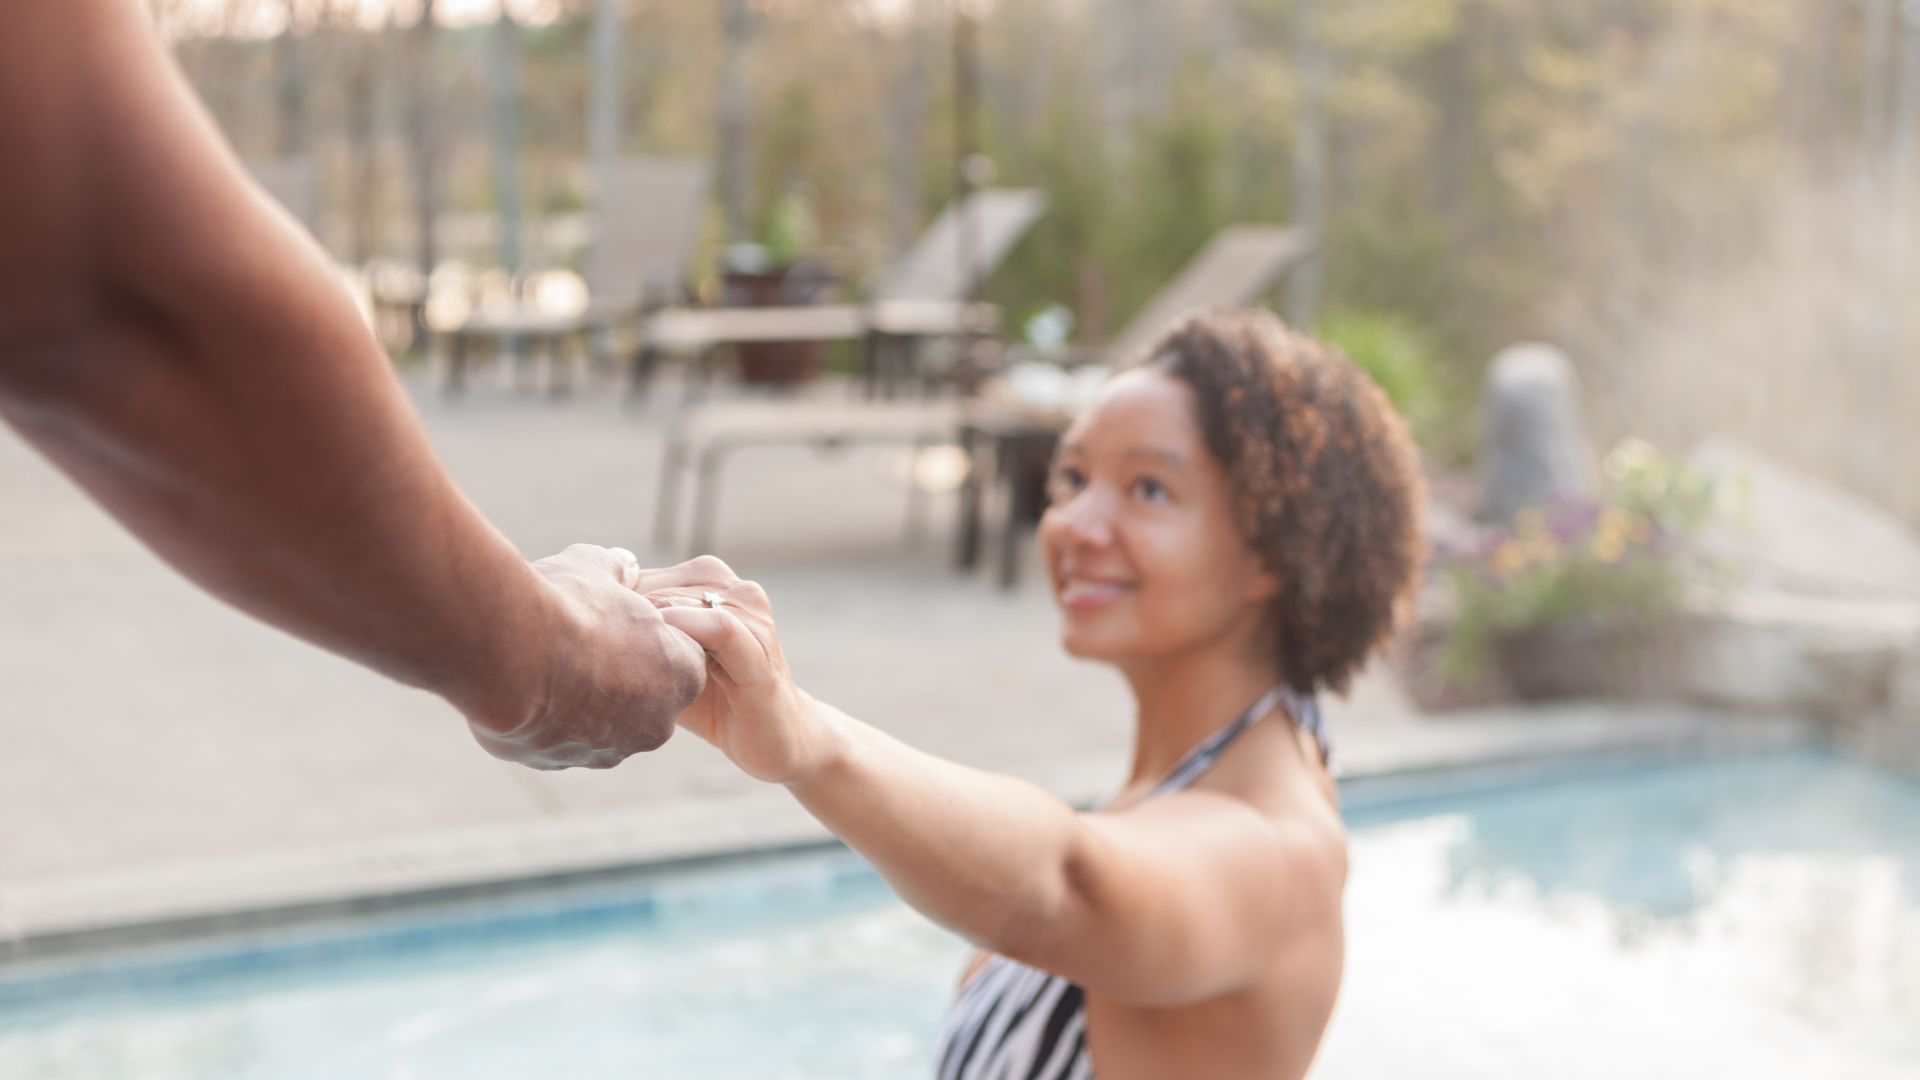 A woman smiling and holding a man's hand pulling him into an outdoor whirlpool